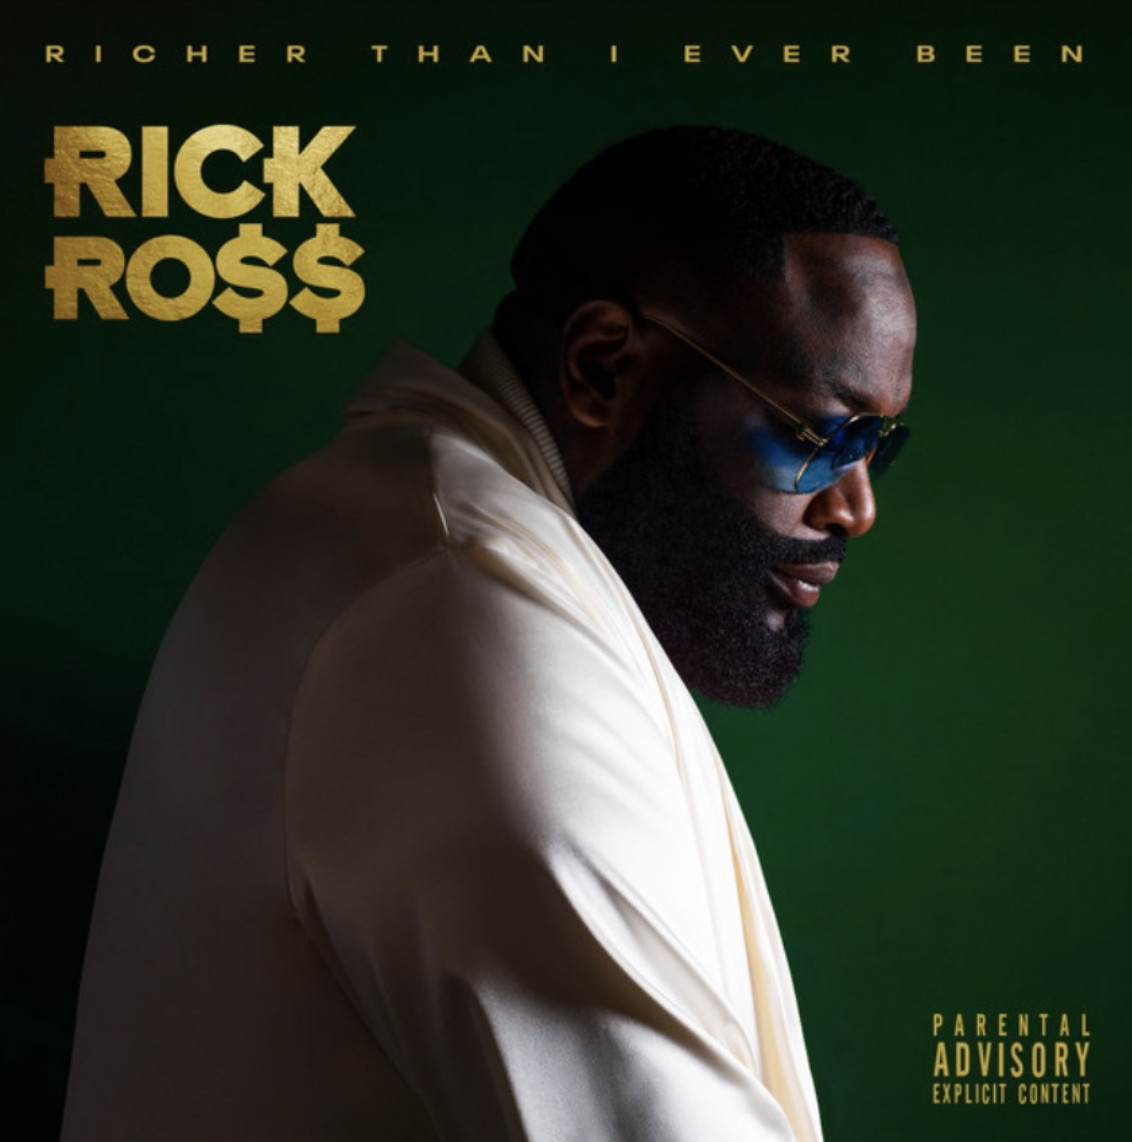 Rick Ross & Anderson .Paak Link Up On “Not For Nothing”